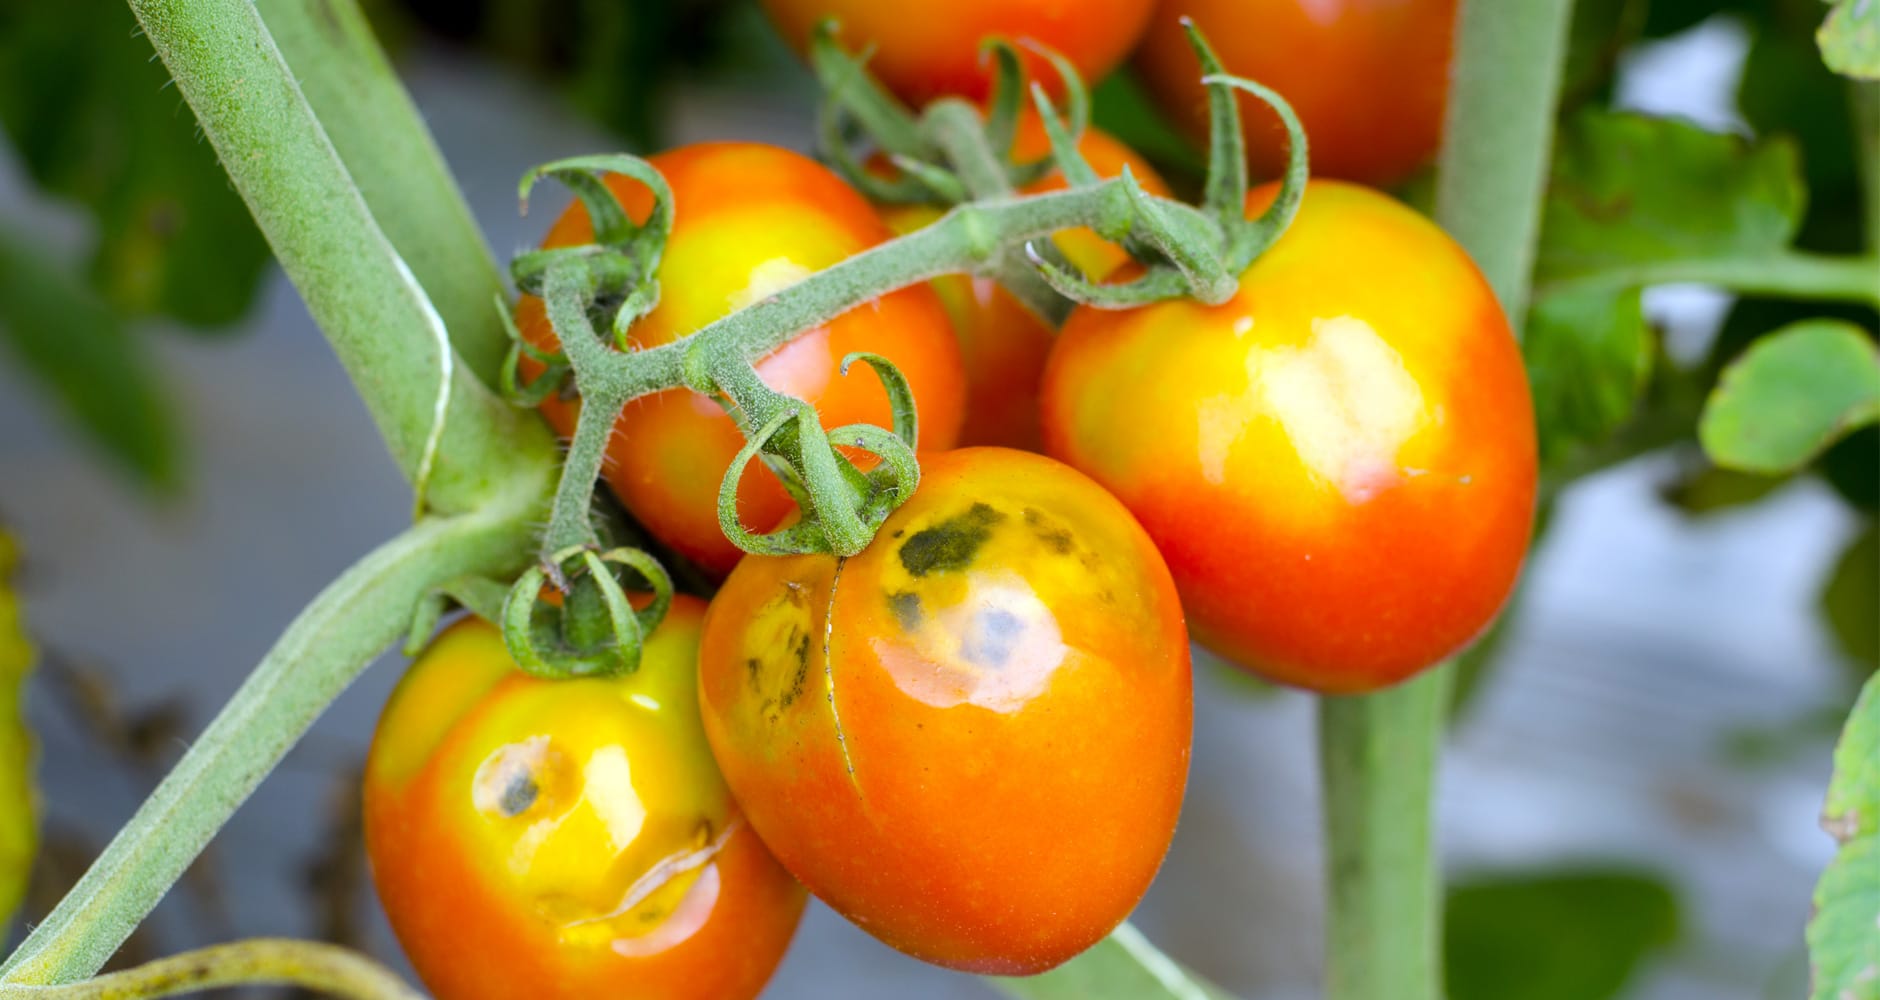 Tomatoes with sun scald.